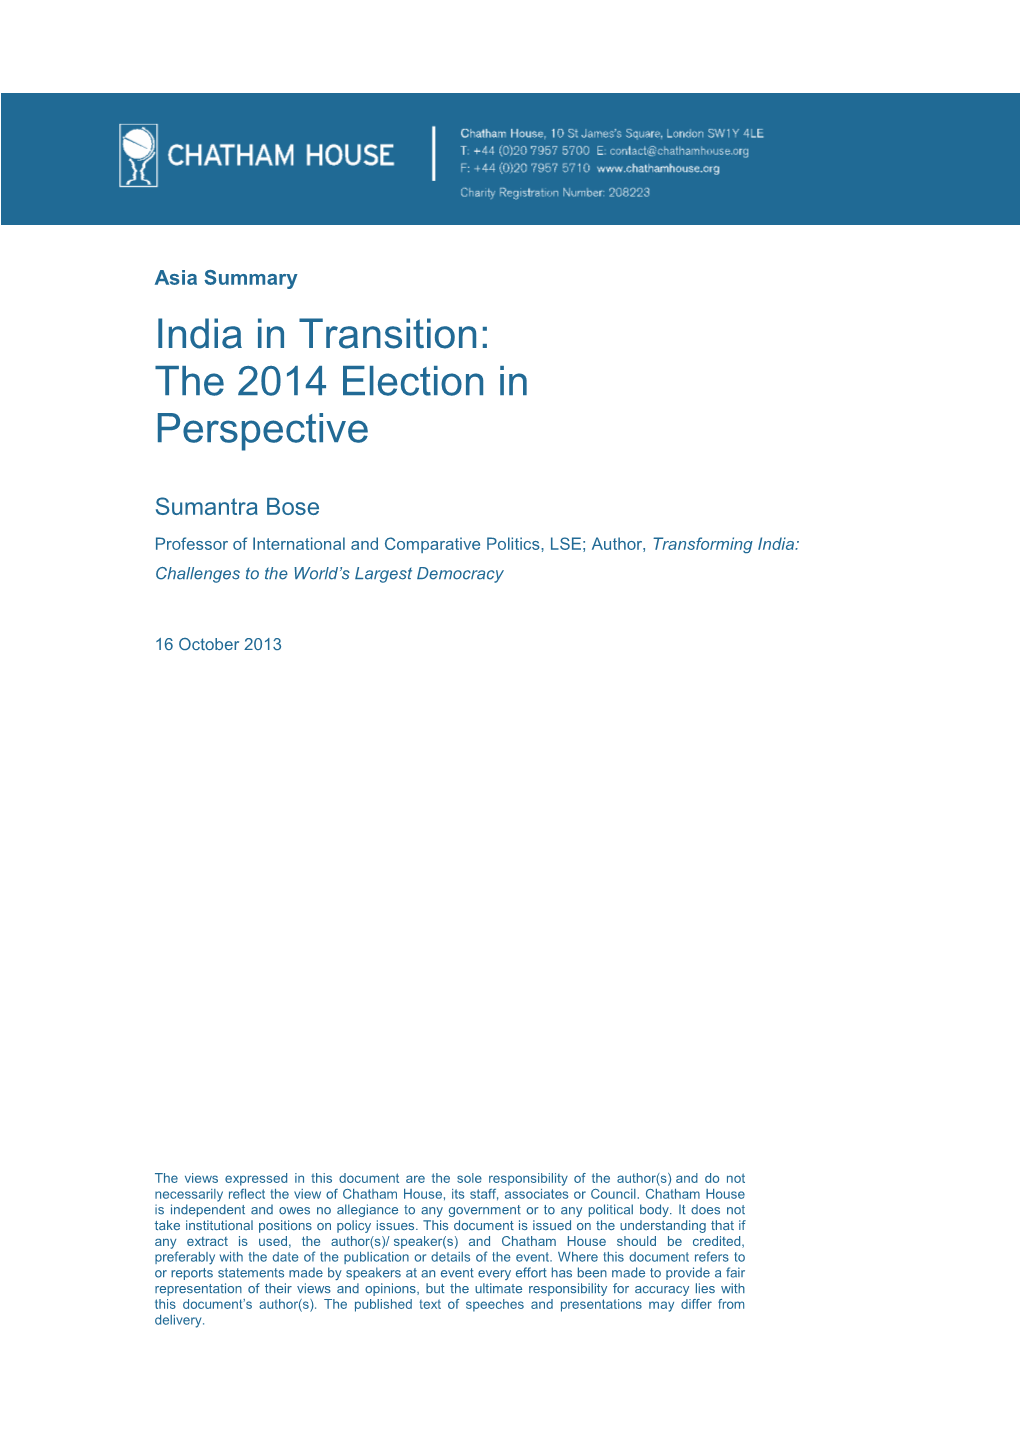 India in Transition: the 2014 Election in Perspective